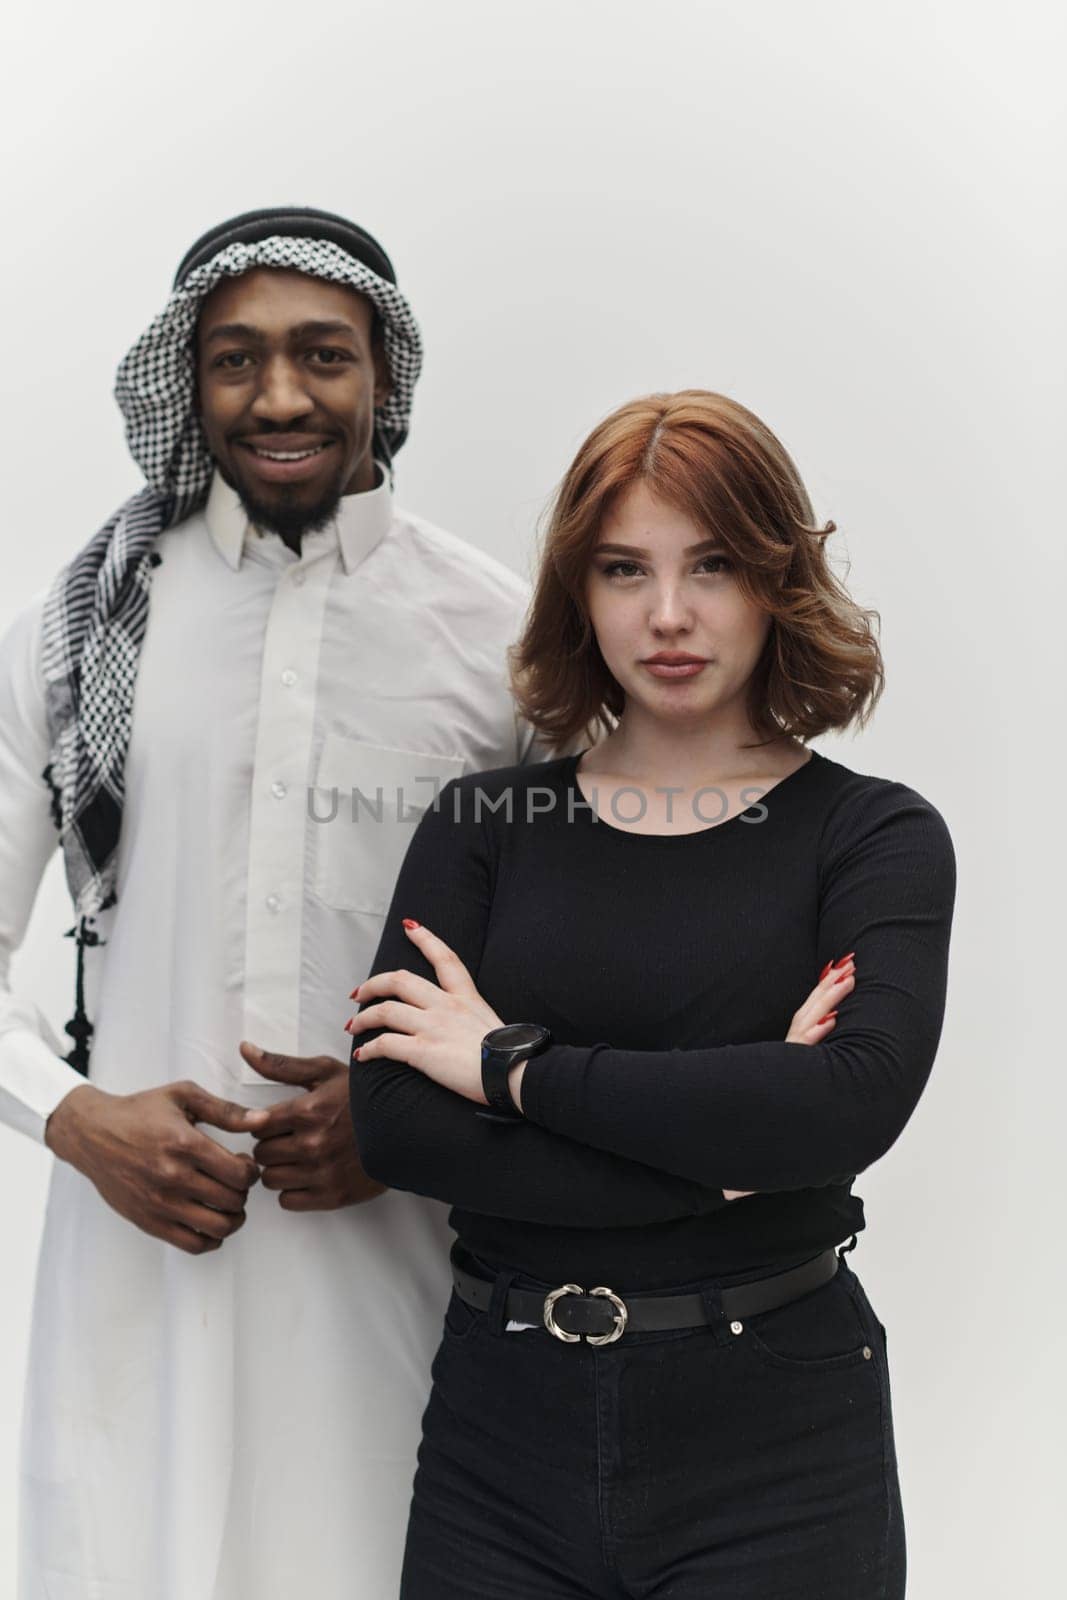 Muslim entrepreneur and a contemporary red-haired girl strike a pose together against a clean white background, embodying confidence, diversity, and a dynamic entrepreneurial spirit in their partnership by dotshock